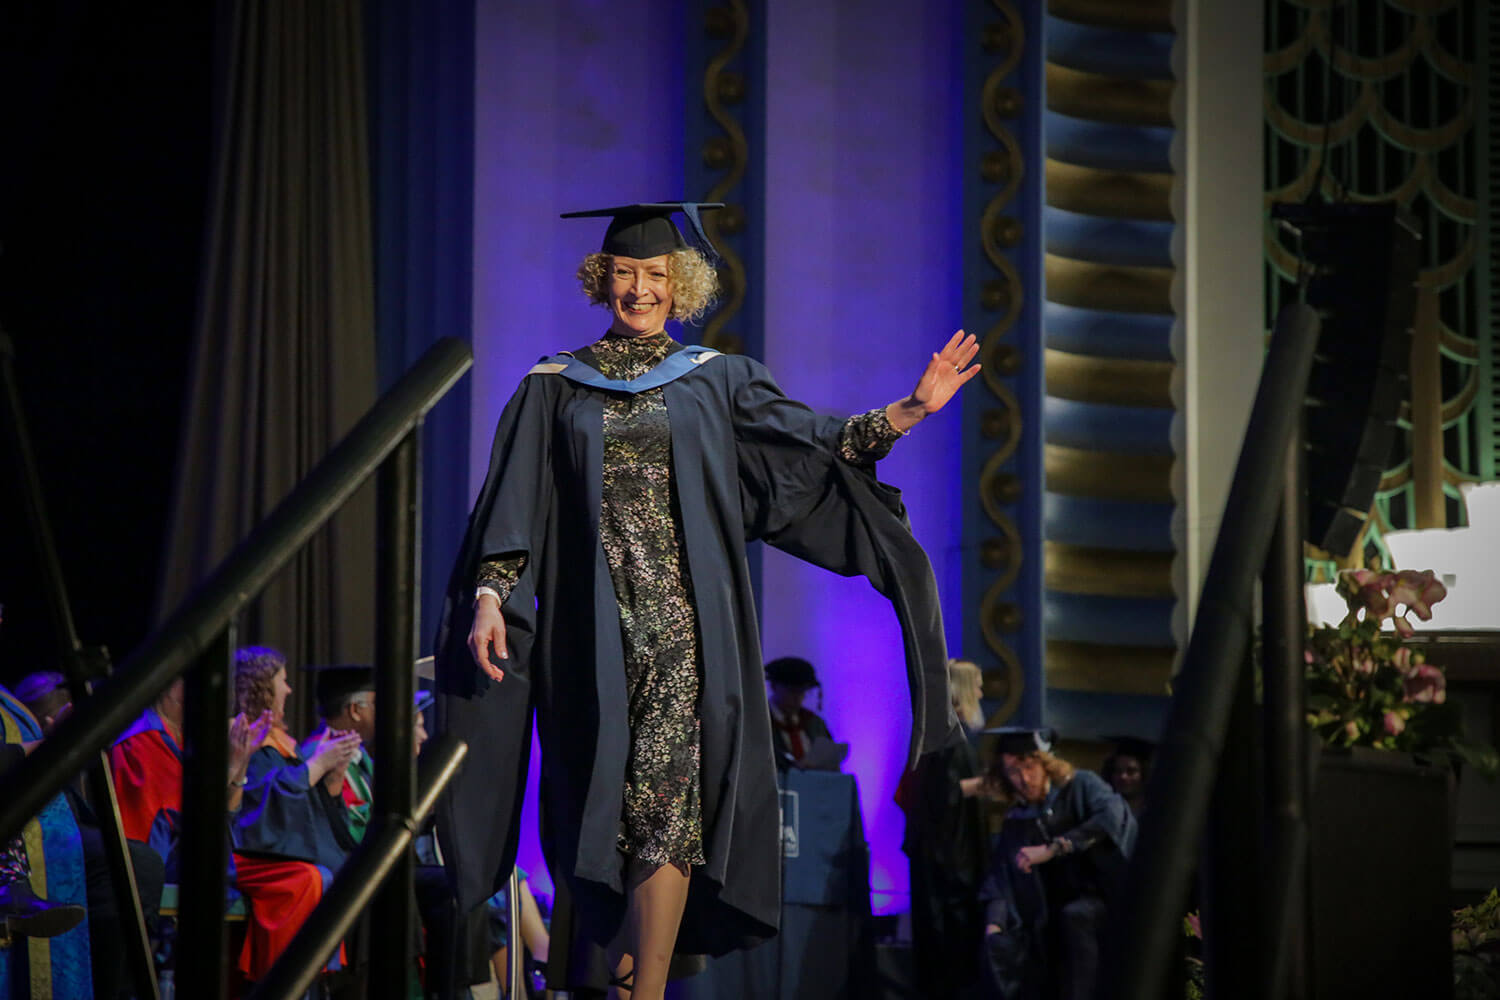 Graduand walks confidently across the stage, waving at the crowd